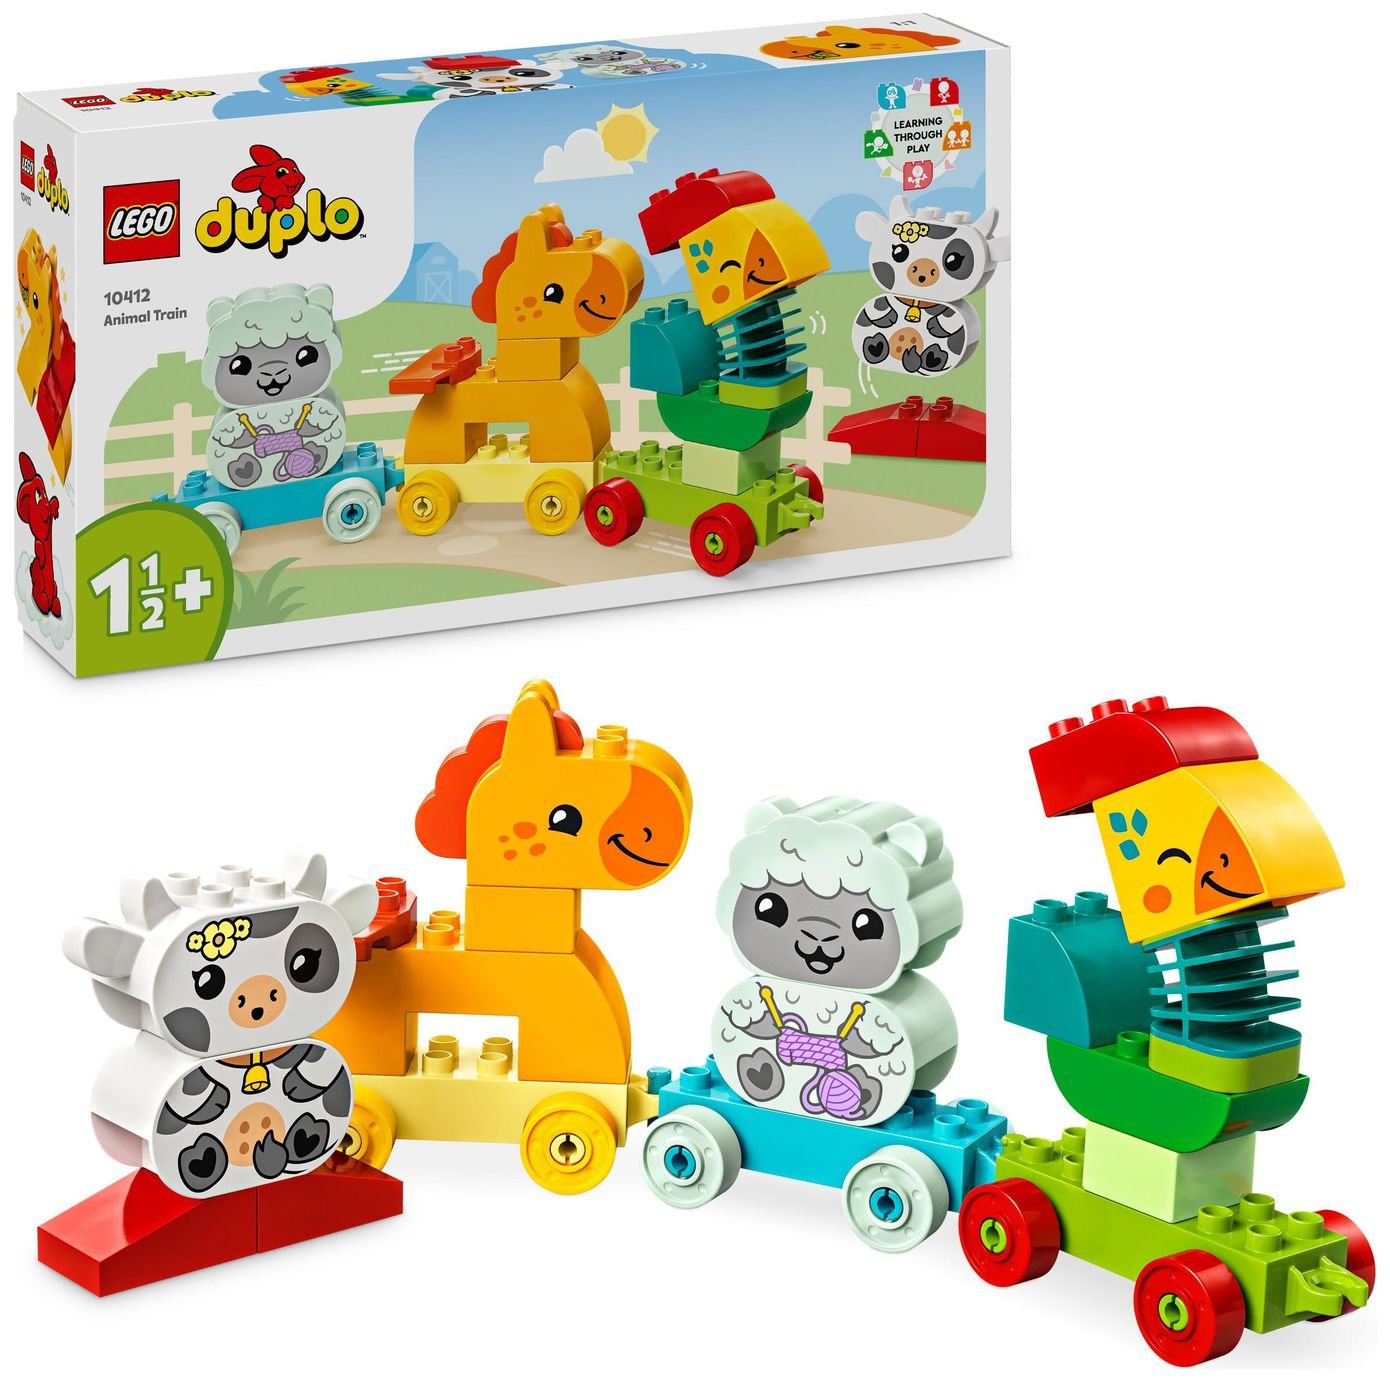 LEGO DUPLO My First Animal Train Toddler Learning Toys 10412